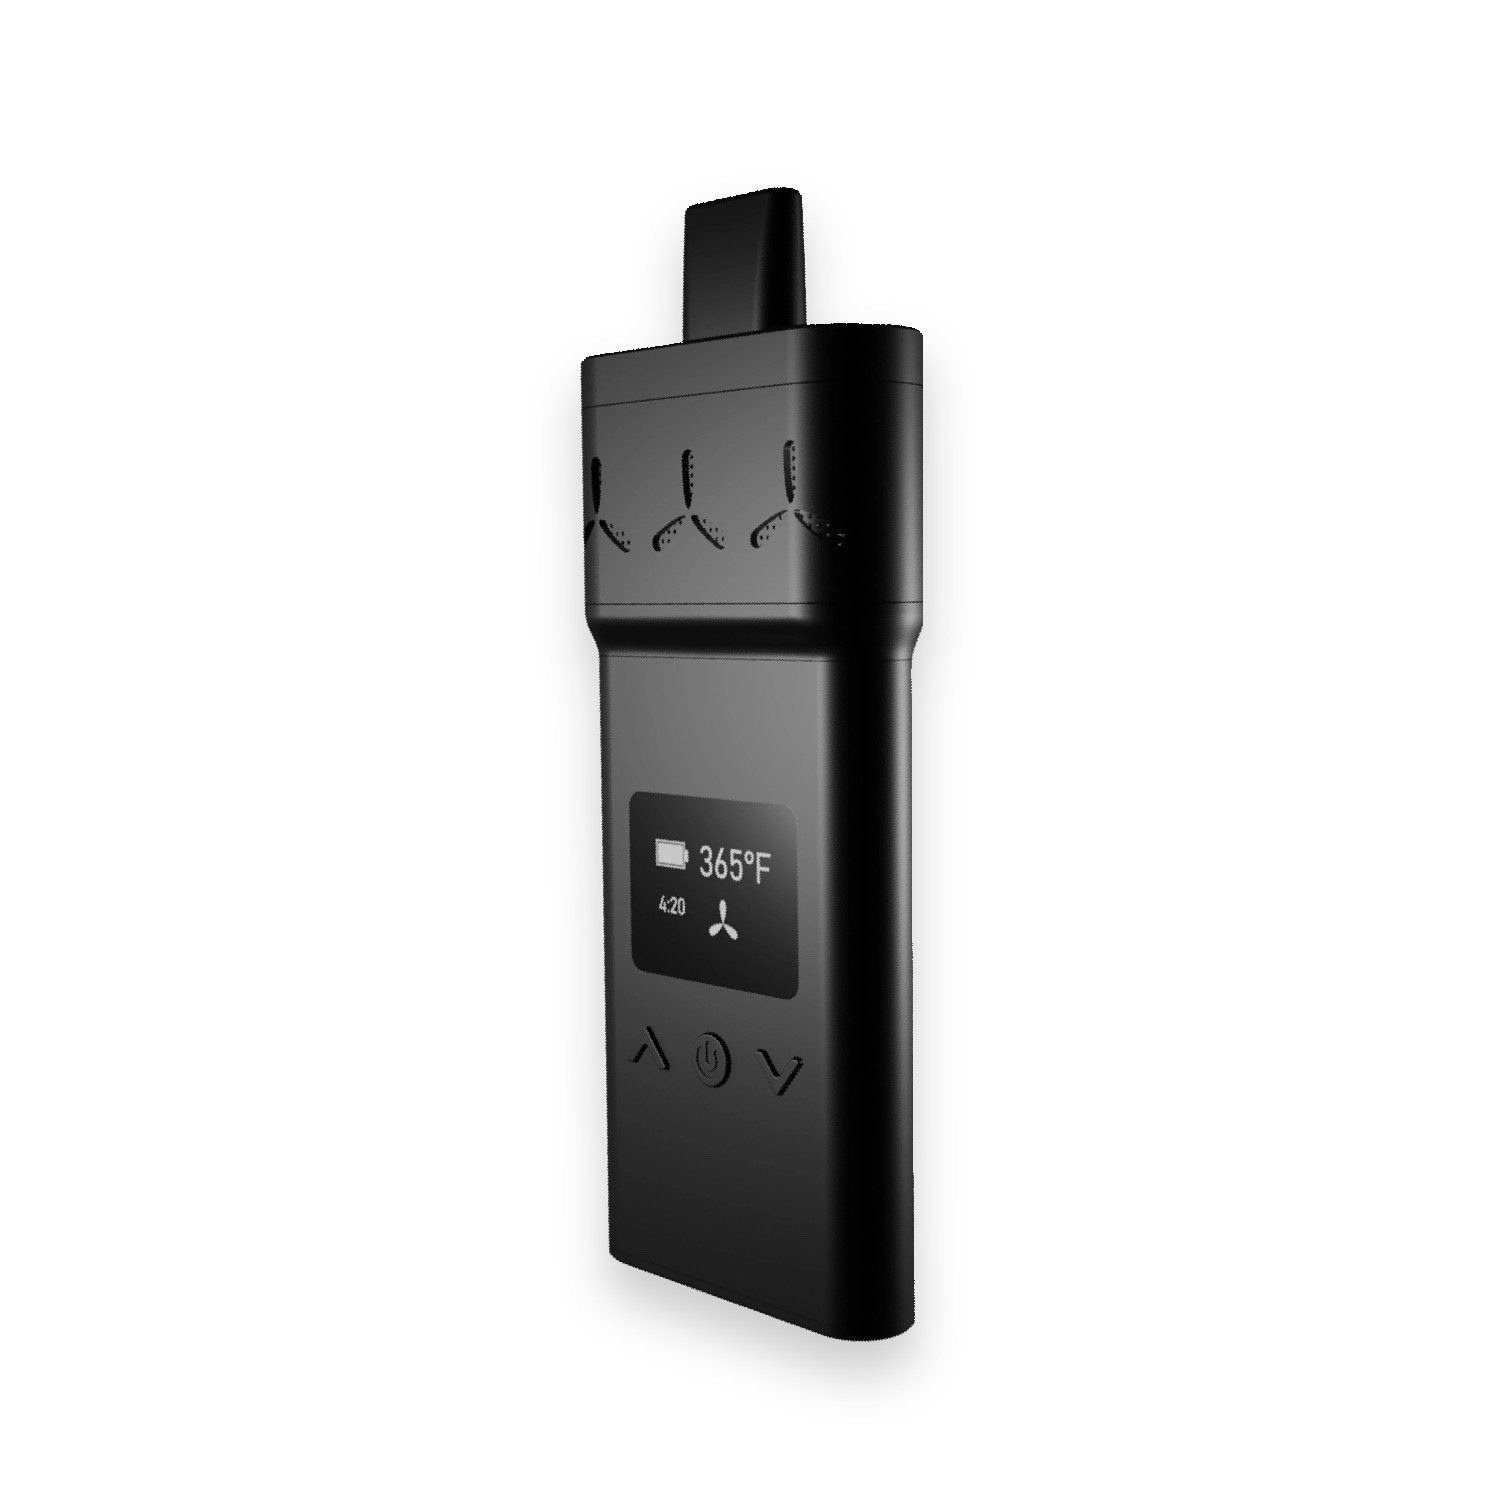 Vaporizer for Weed AirVape-X to Buy